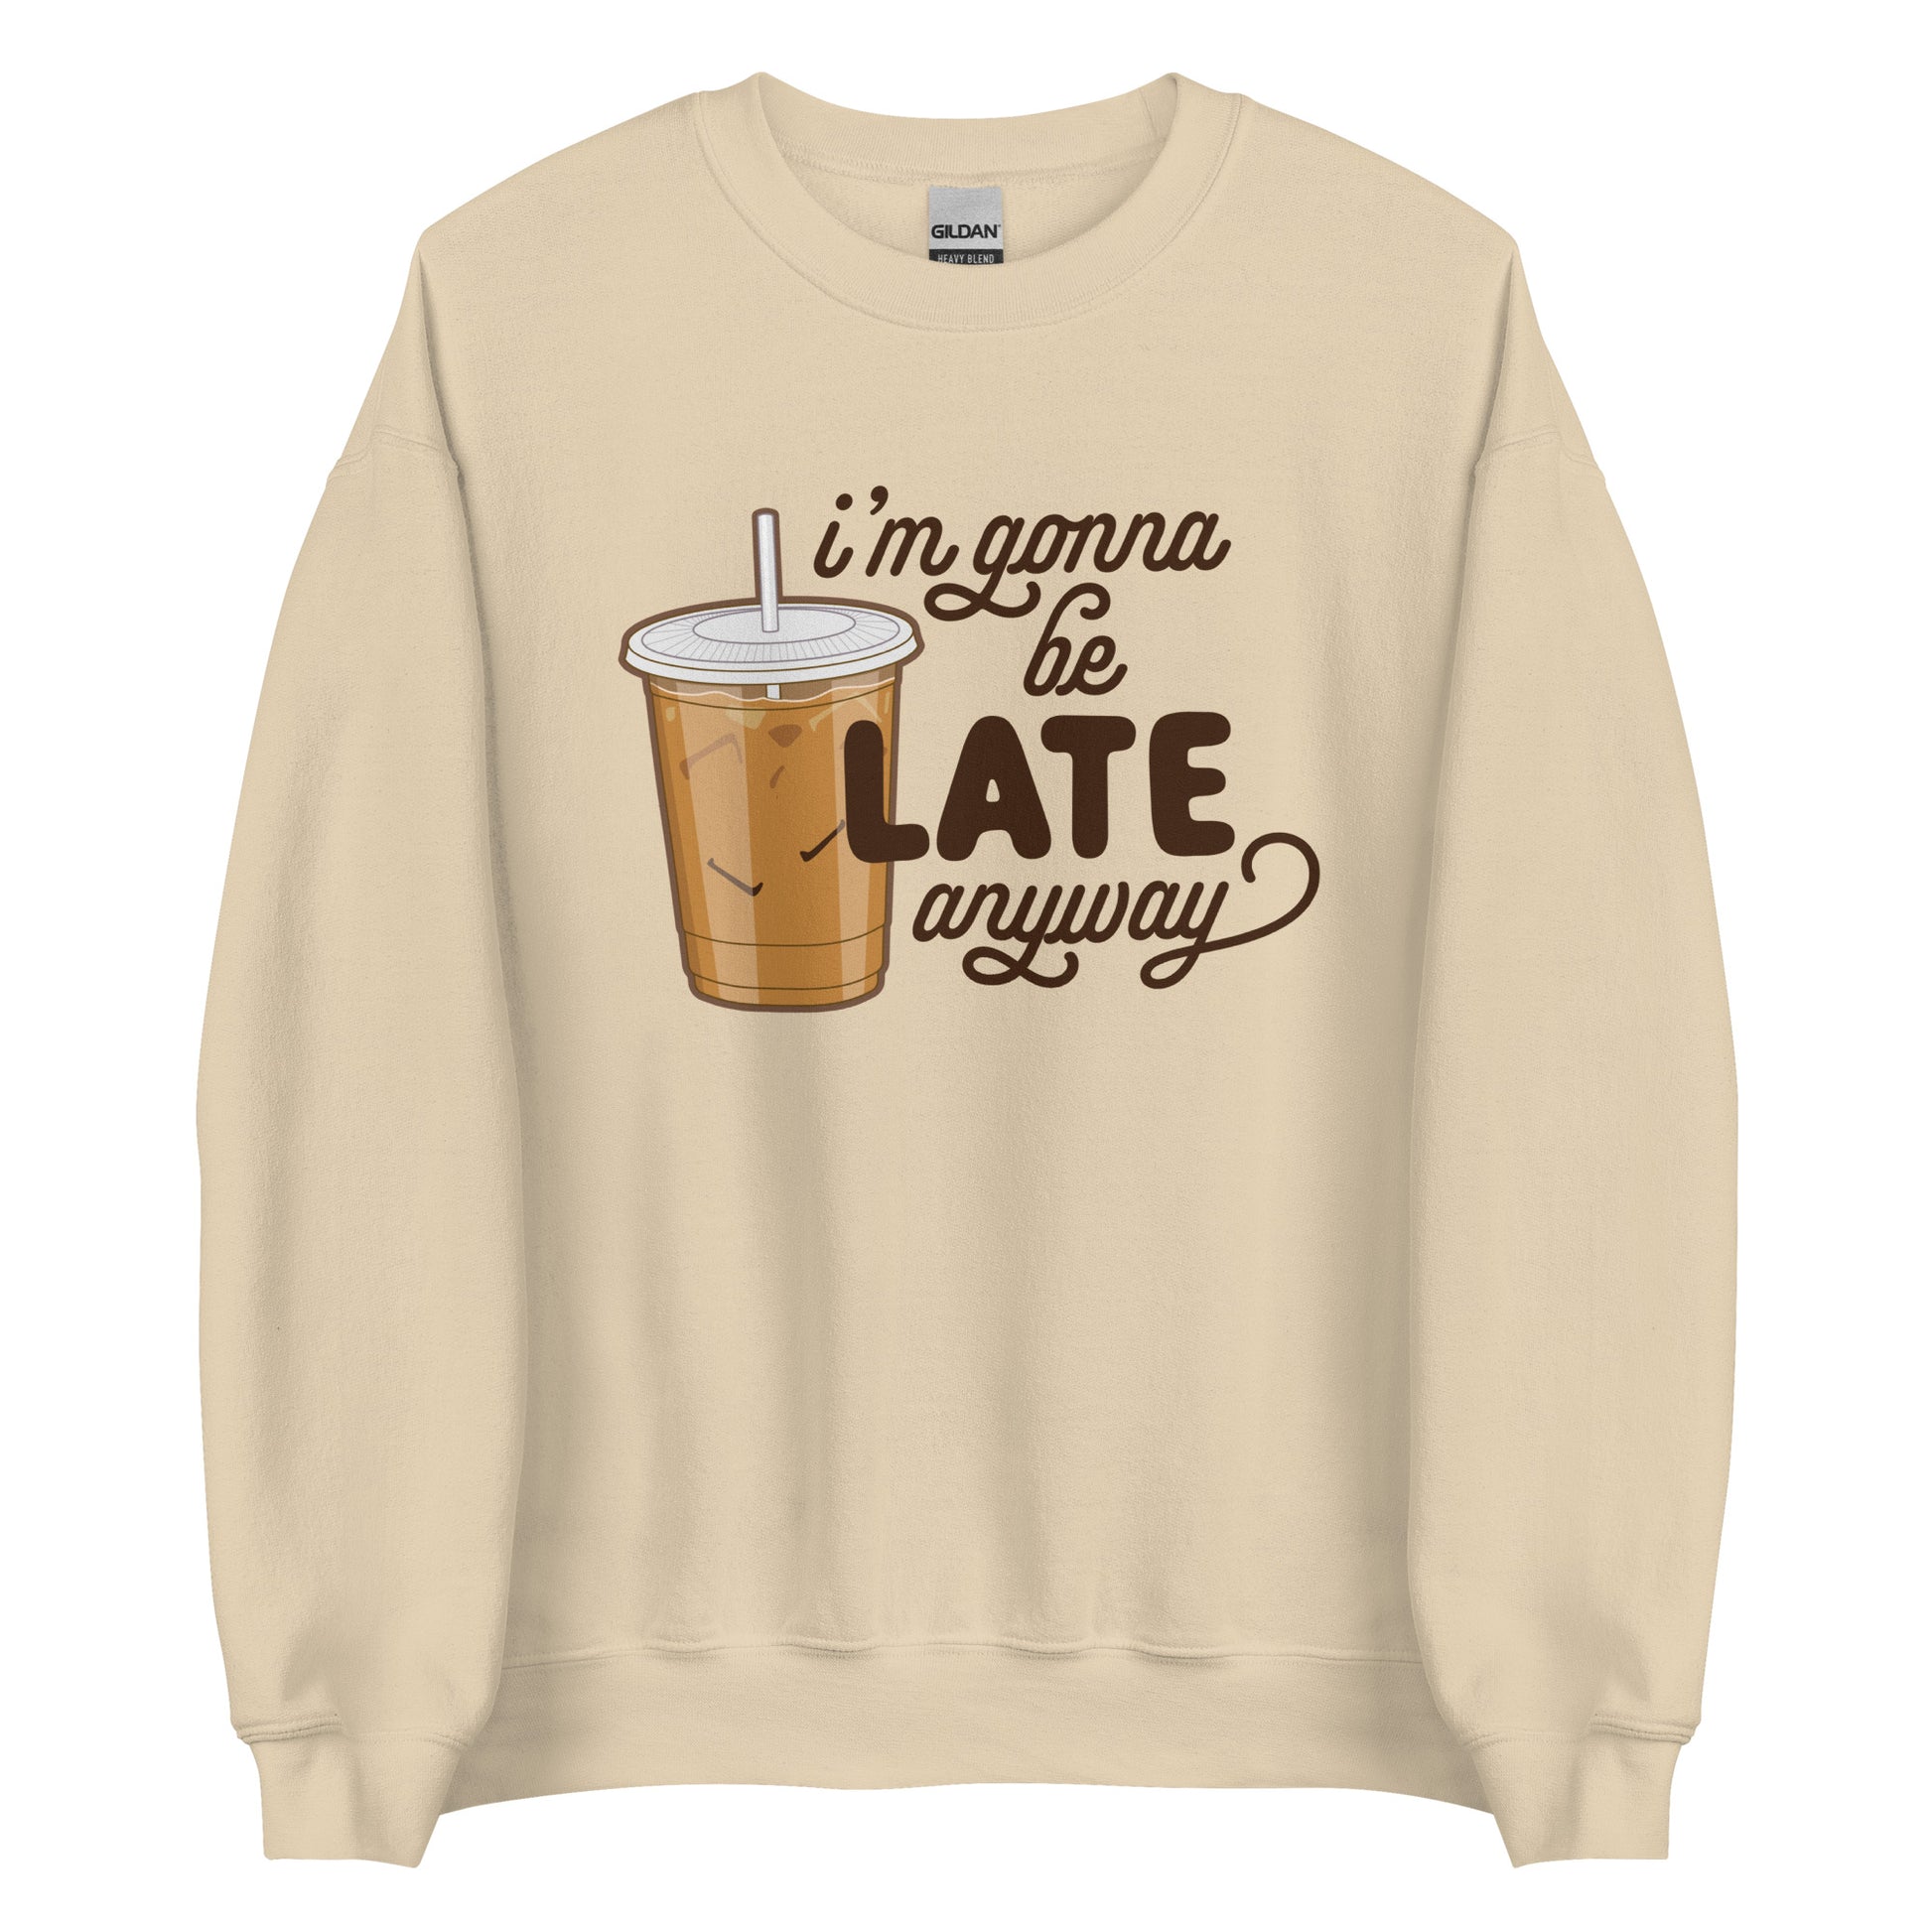 A light tan crewneck sweatshirt featuring an illustration of iced coffee. Text next to the coffee reads "I'm gonna be LATE anyway".